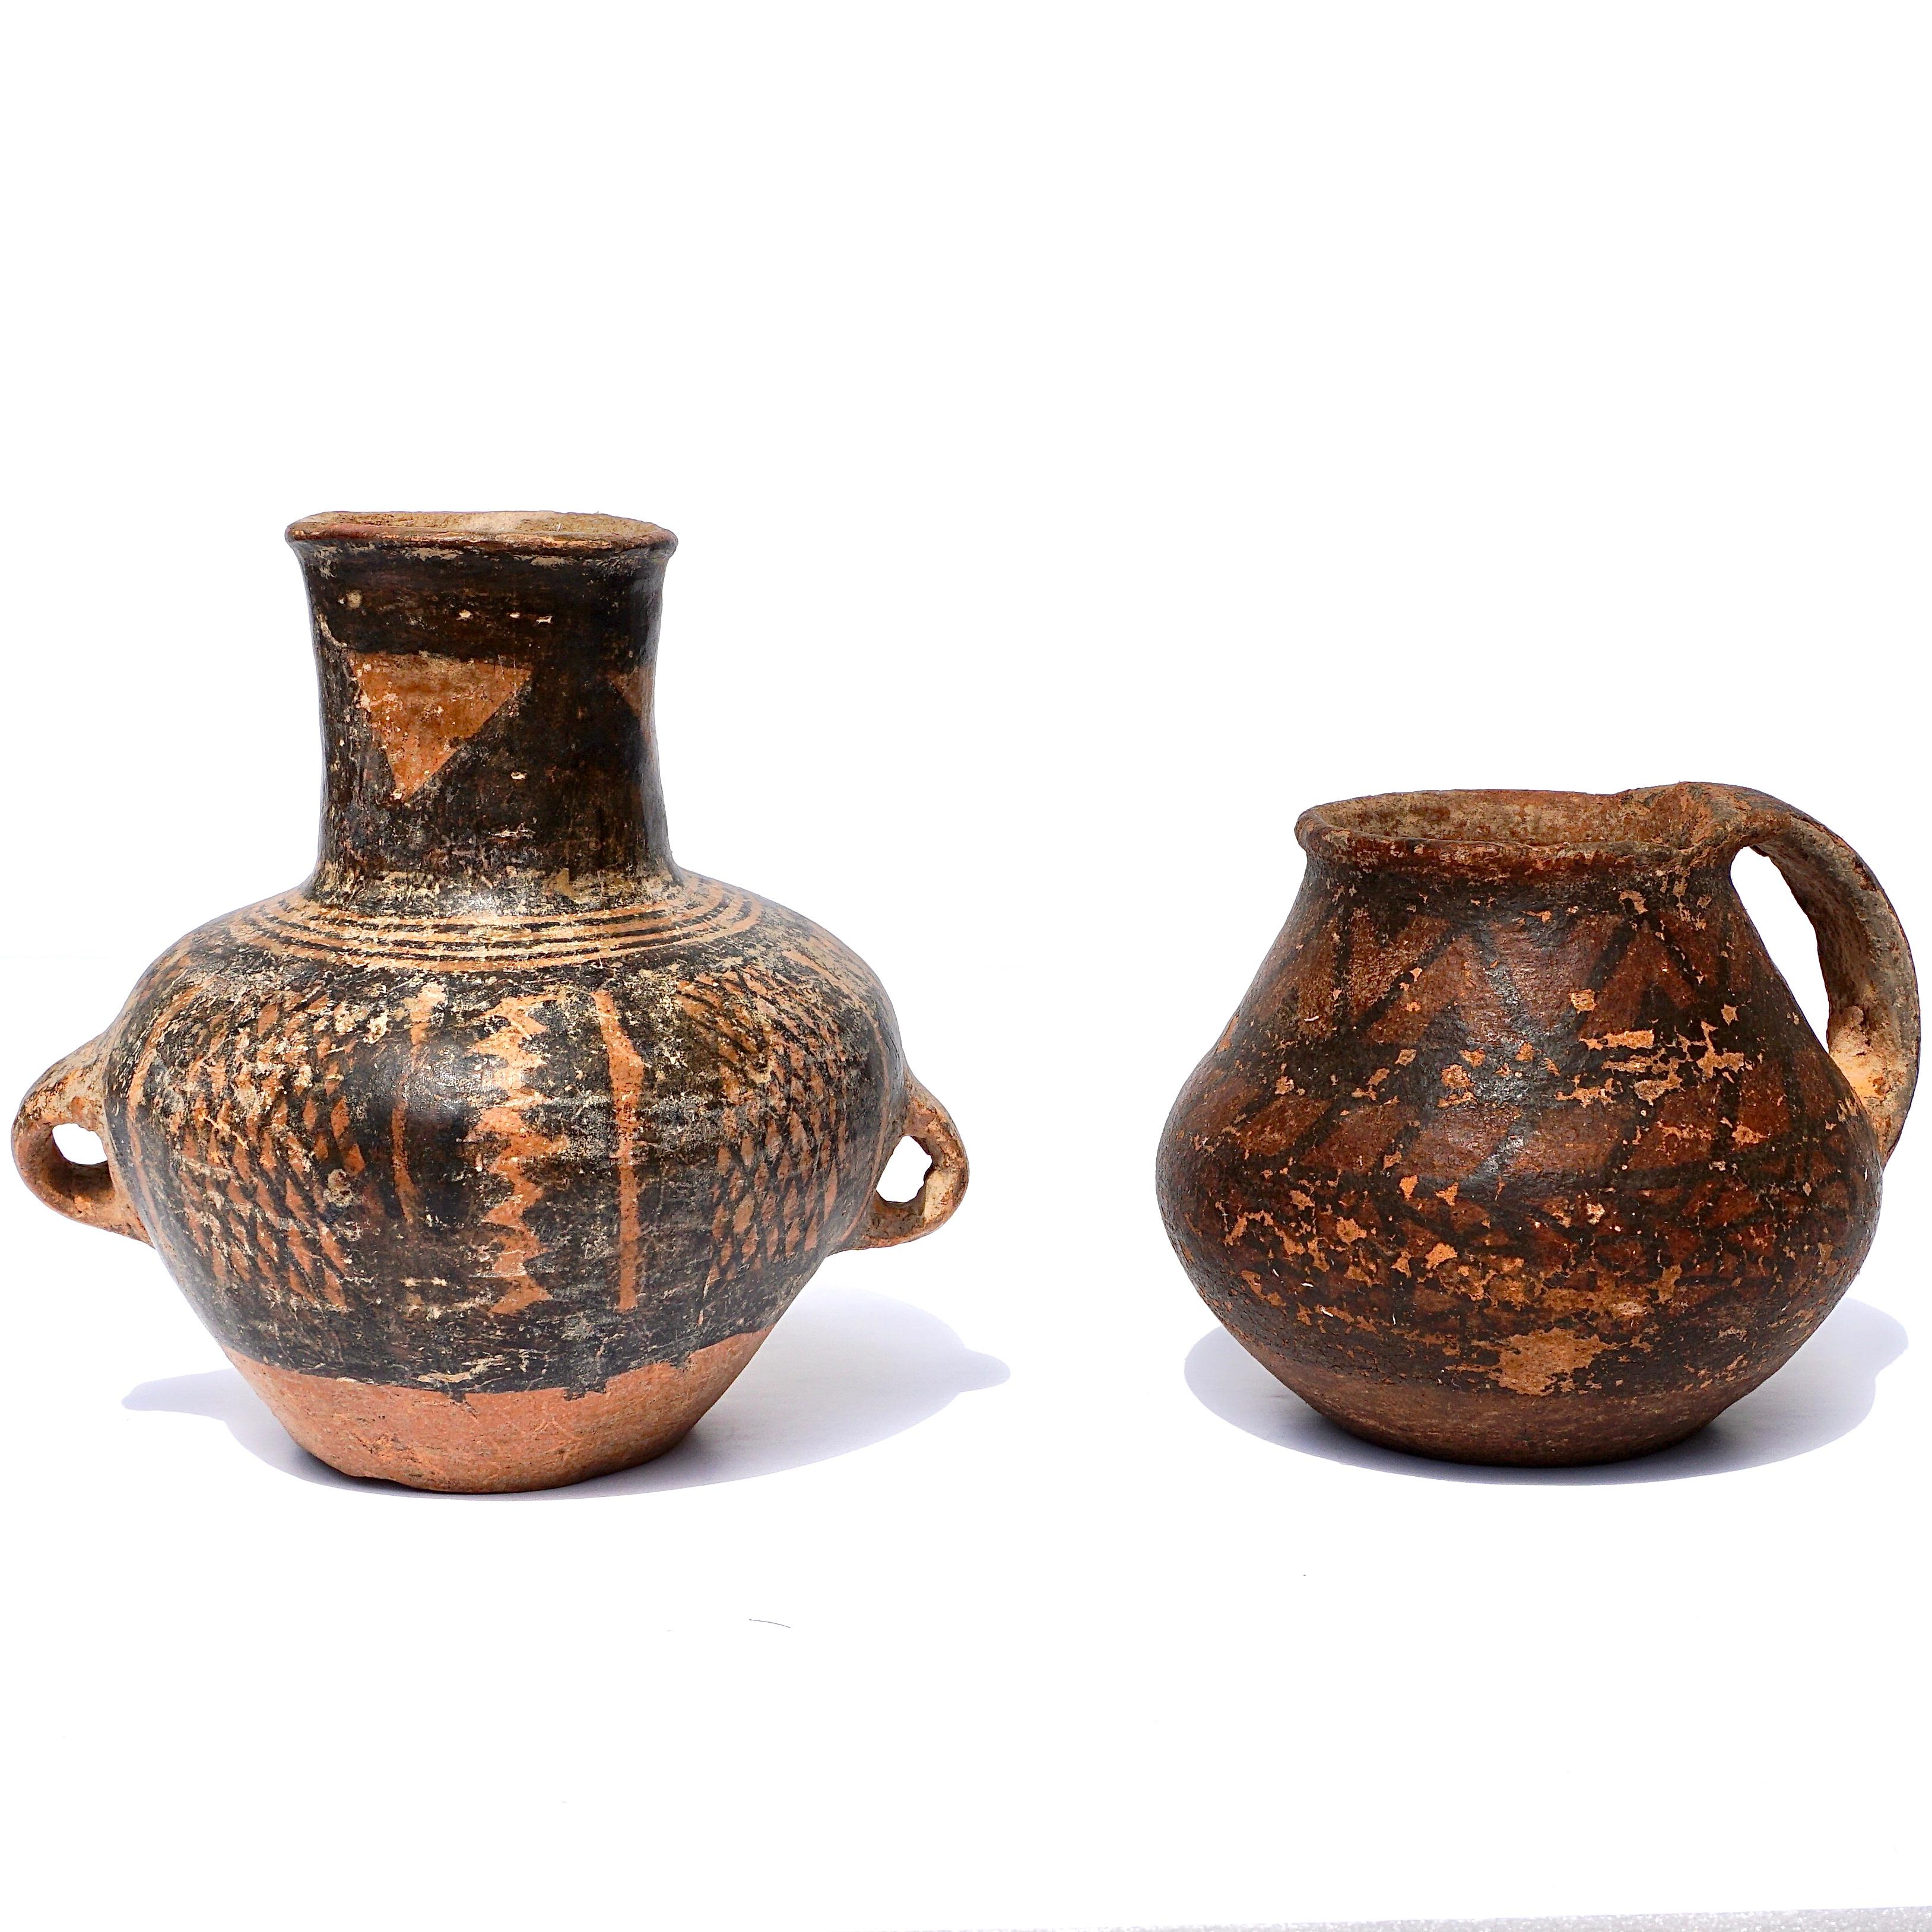 Pair of Neolithic period (5000-3000 BCE) 

Two pieces of Chinese pottery including: 

1.) Jar measuring 6.25